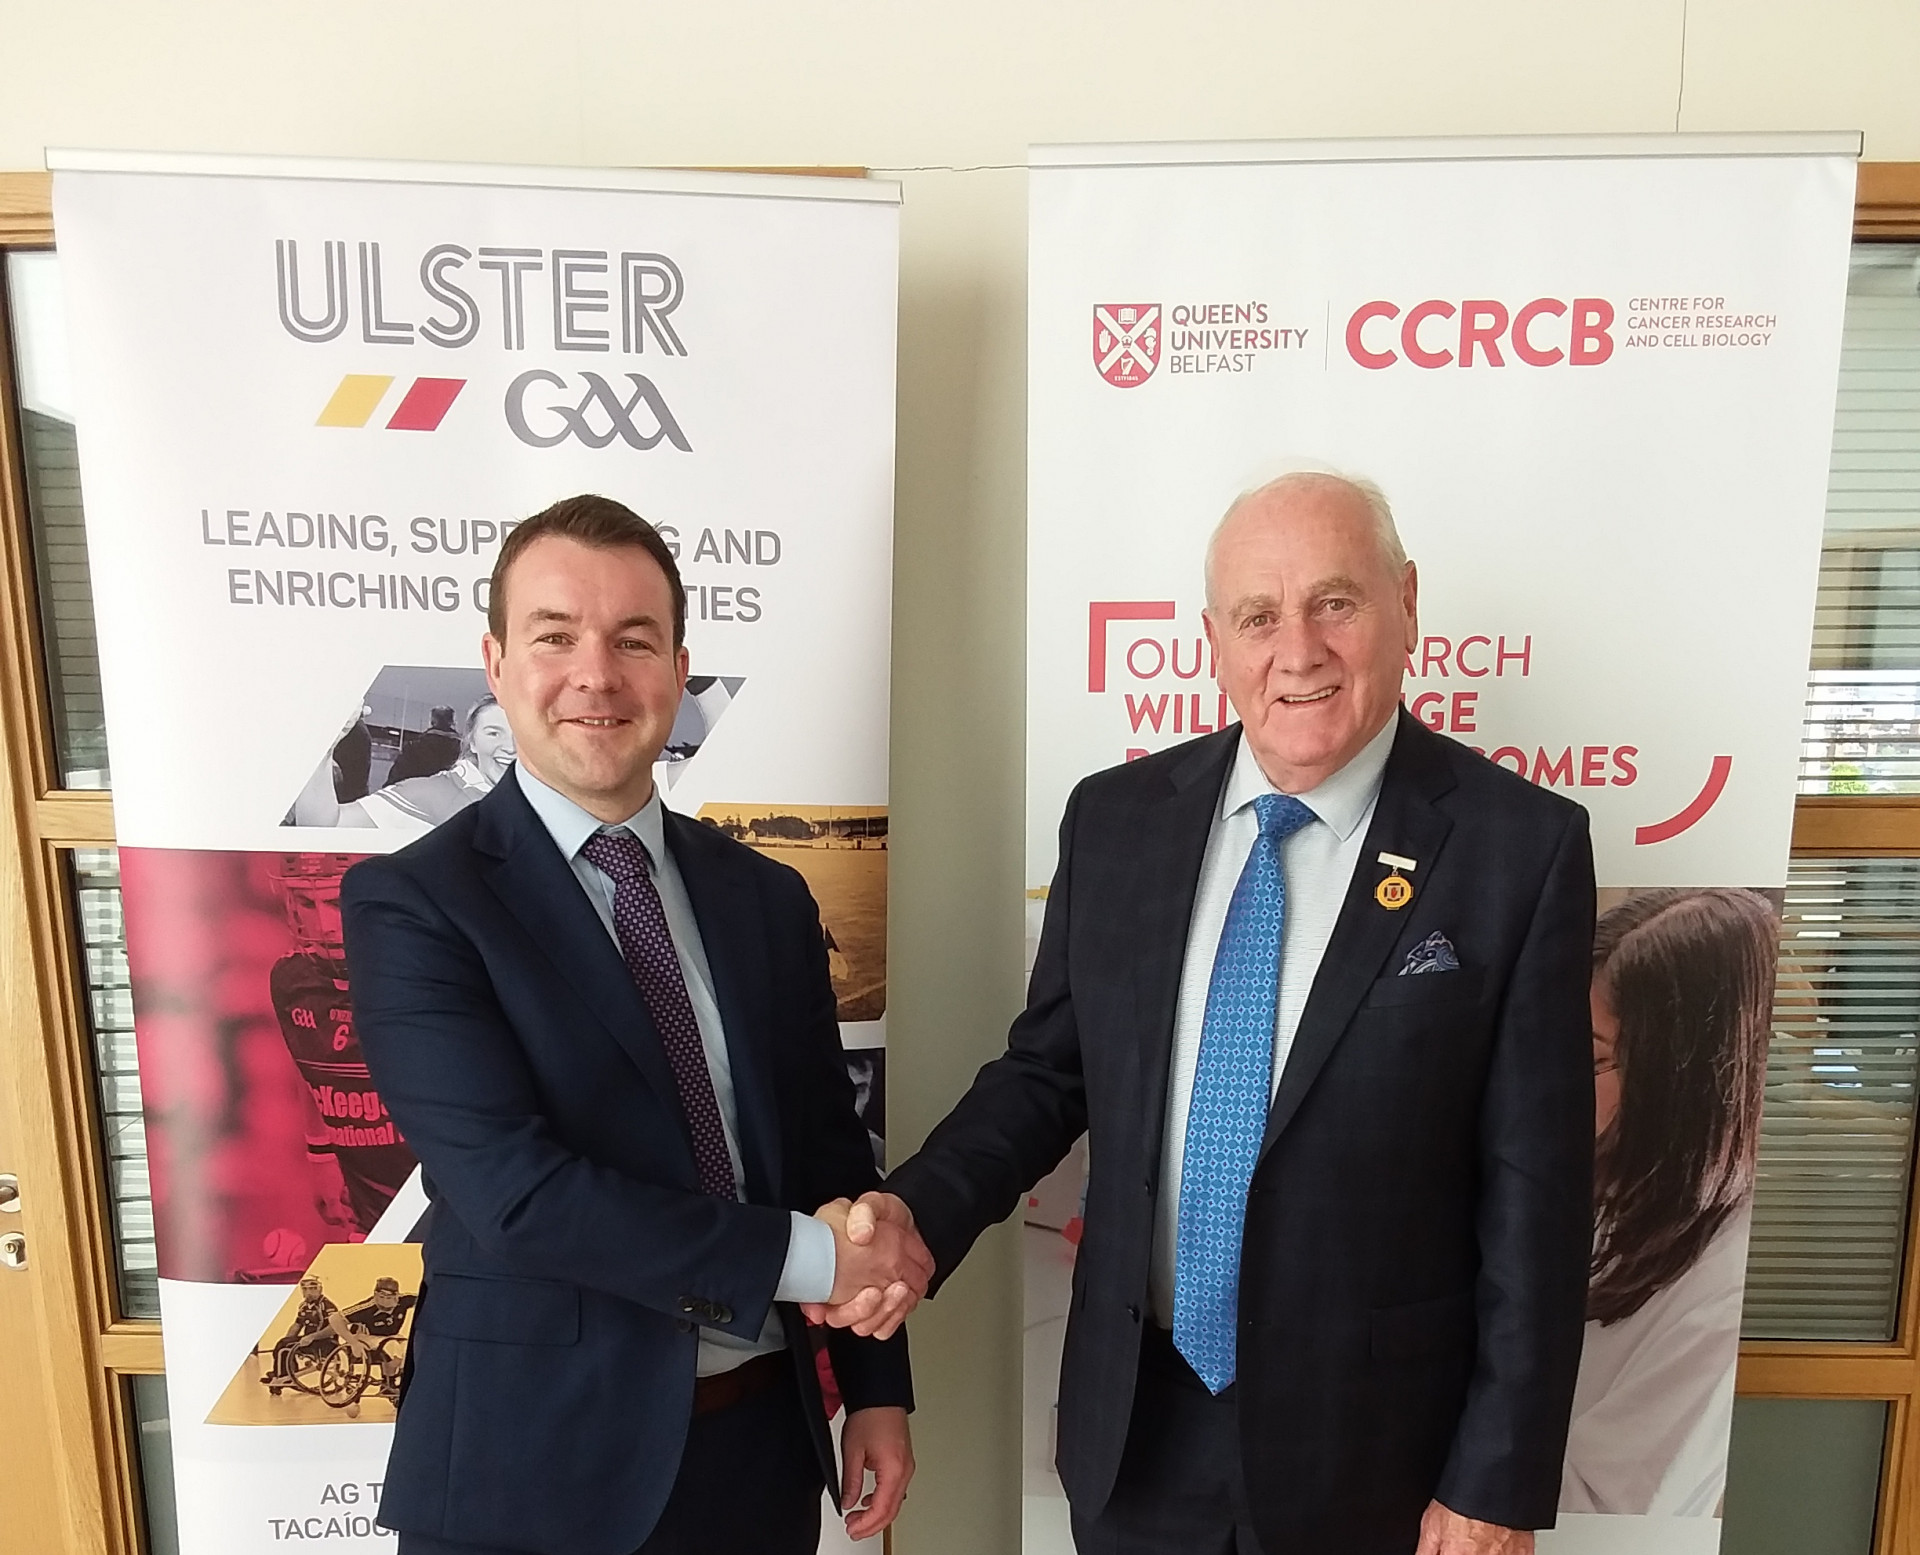 Help Ulster GAA support prostate cancer research